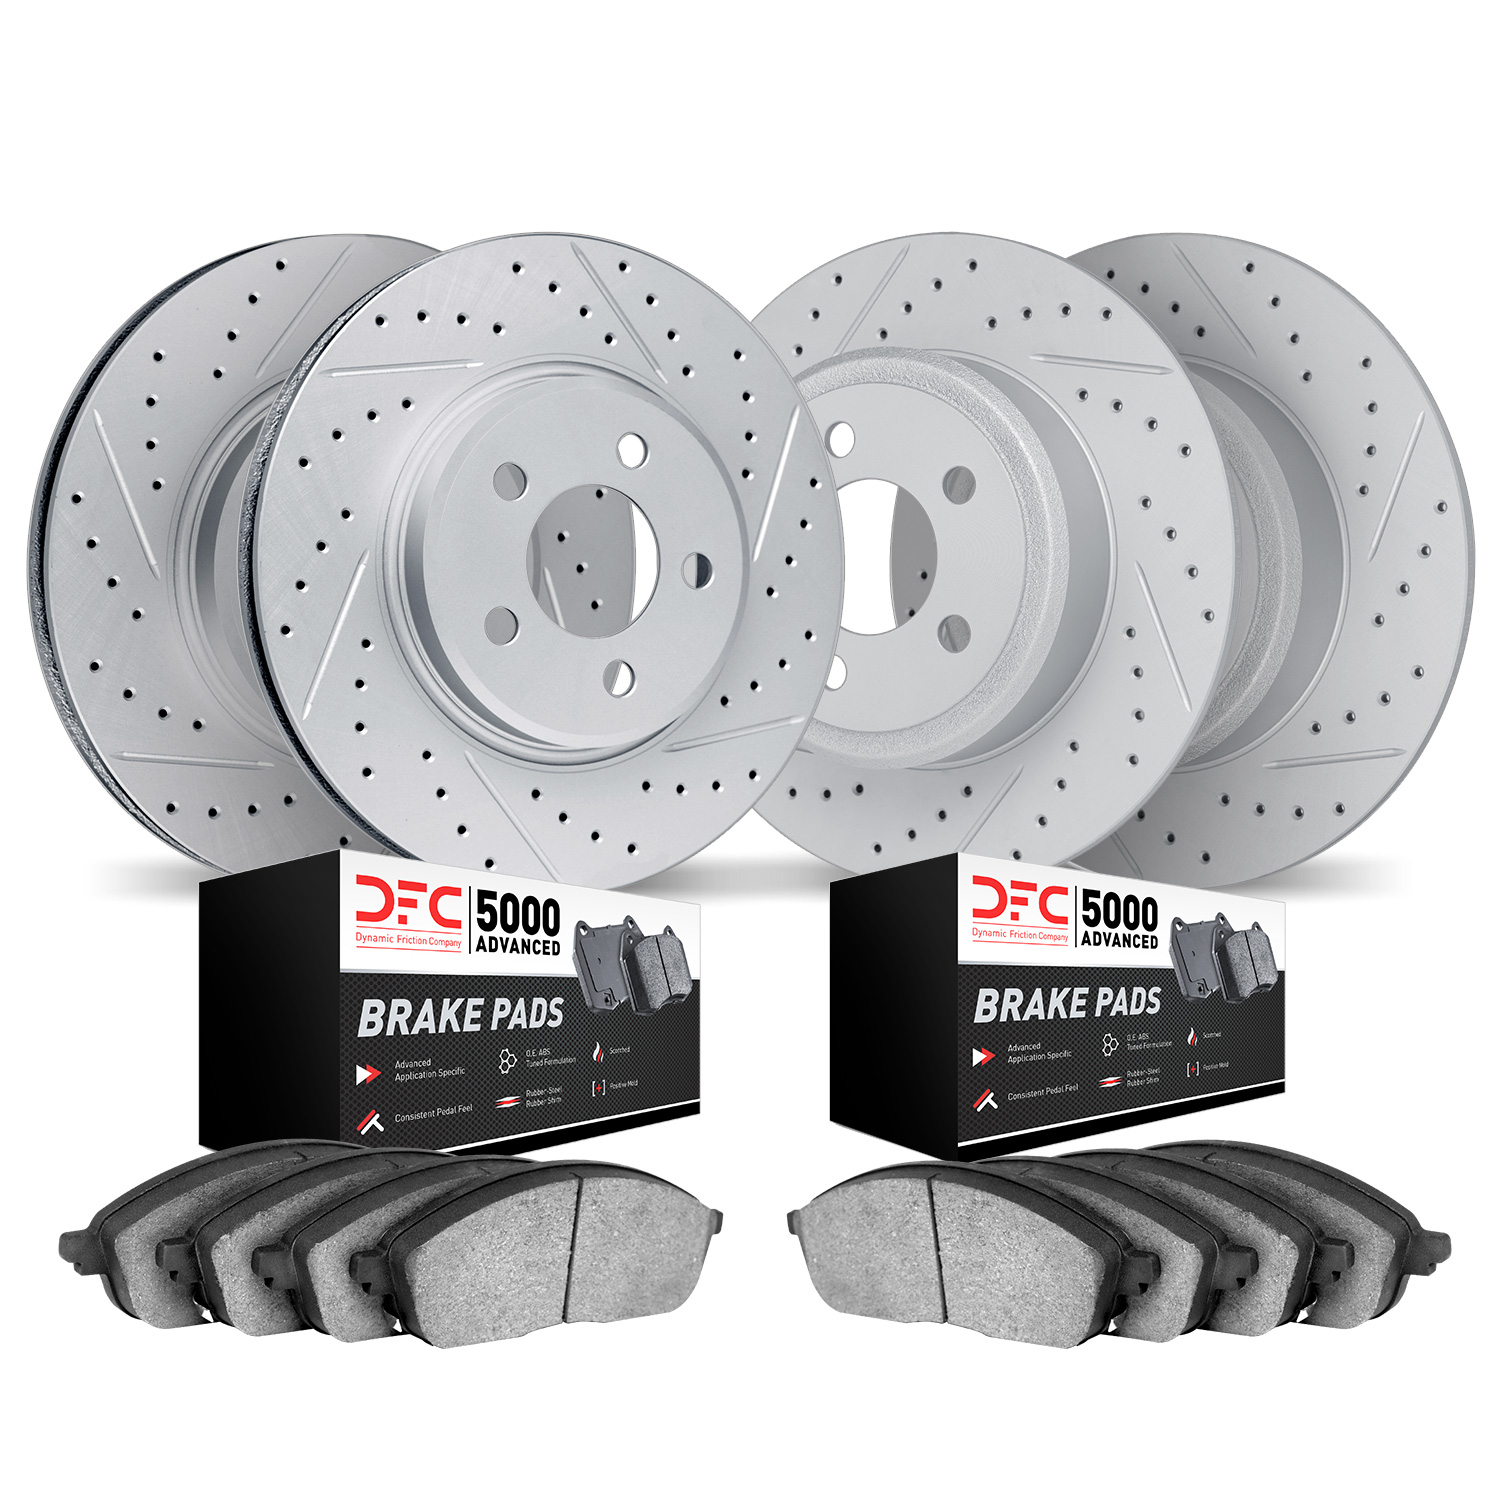 2504-74021 Geoperformance Drilled/Slotted Rotors w/5000 Advanced Brake Pads Kit, 1999-2010 Audi/Volkswagen, Position: Front and